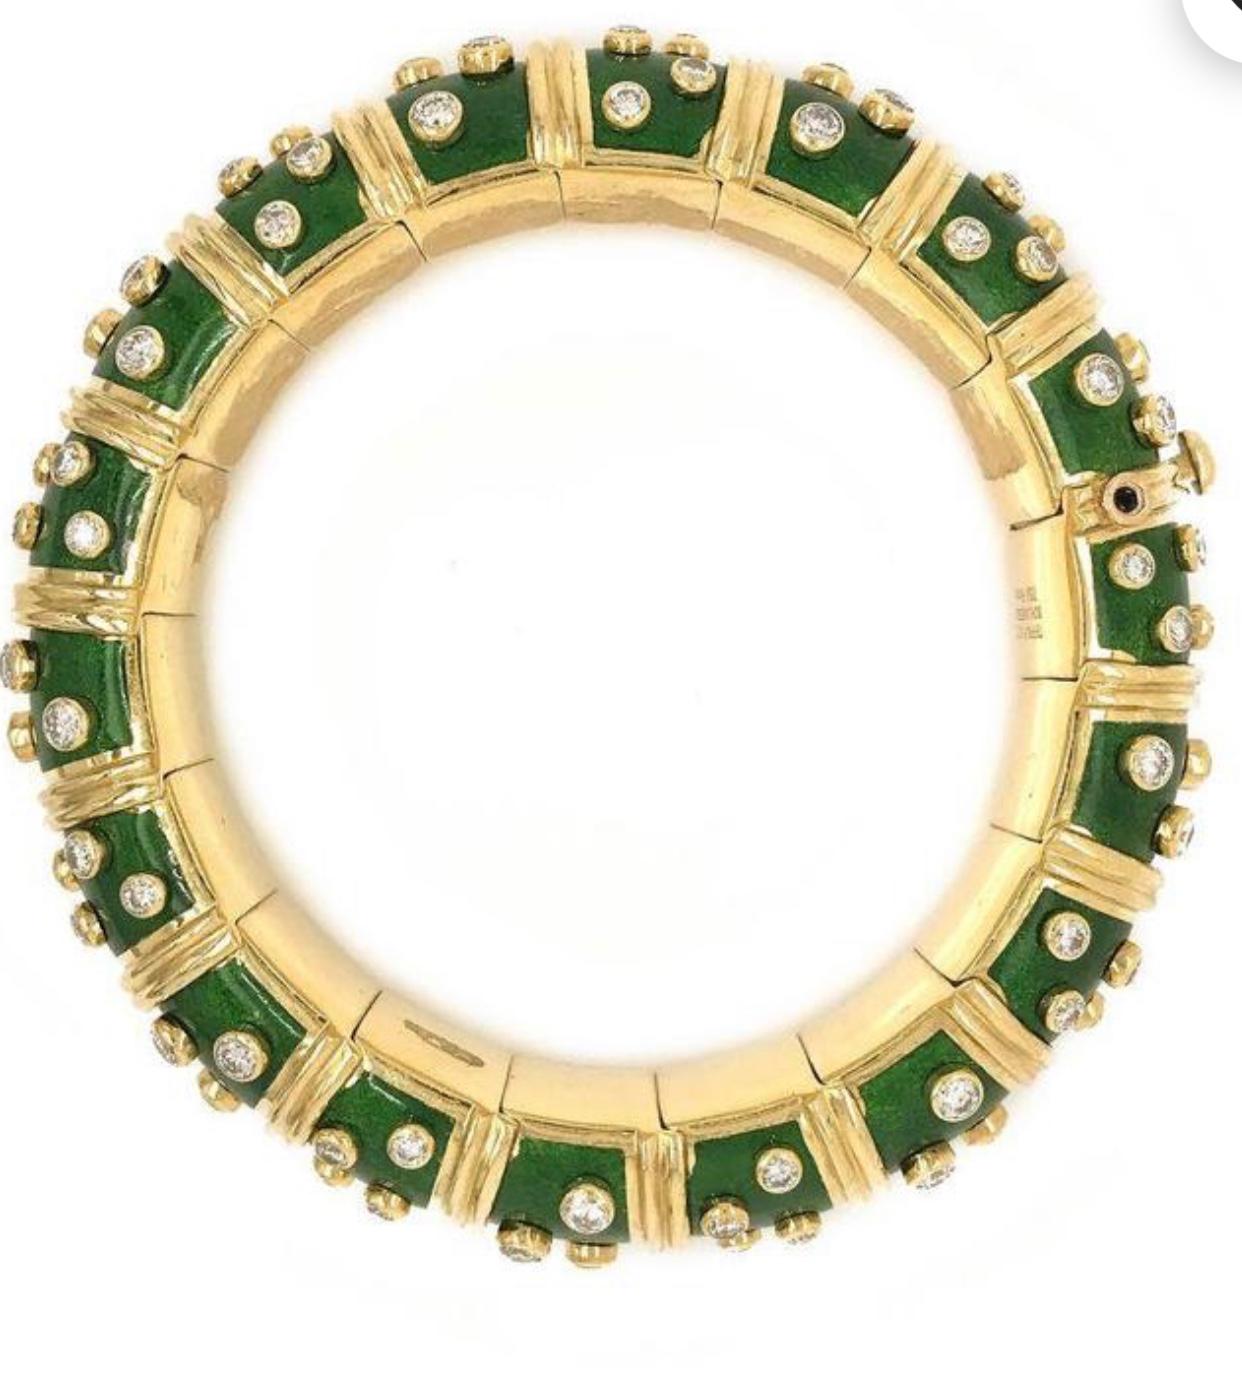 A DIAMOND AND GREEN ENAMEL BANGLE BRACELET, BY JEAN SCHLUMBERGER, TIFFANY & CO.
Designed as a Green paillonné enamel hinged bangle, decorated with collet-set diamonds and sculpted gold vertical bands, 6 3/4 ins. inner diameter, mounted in platinum